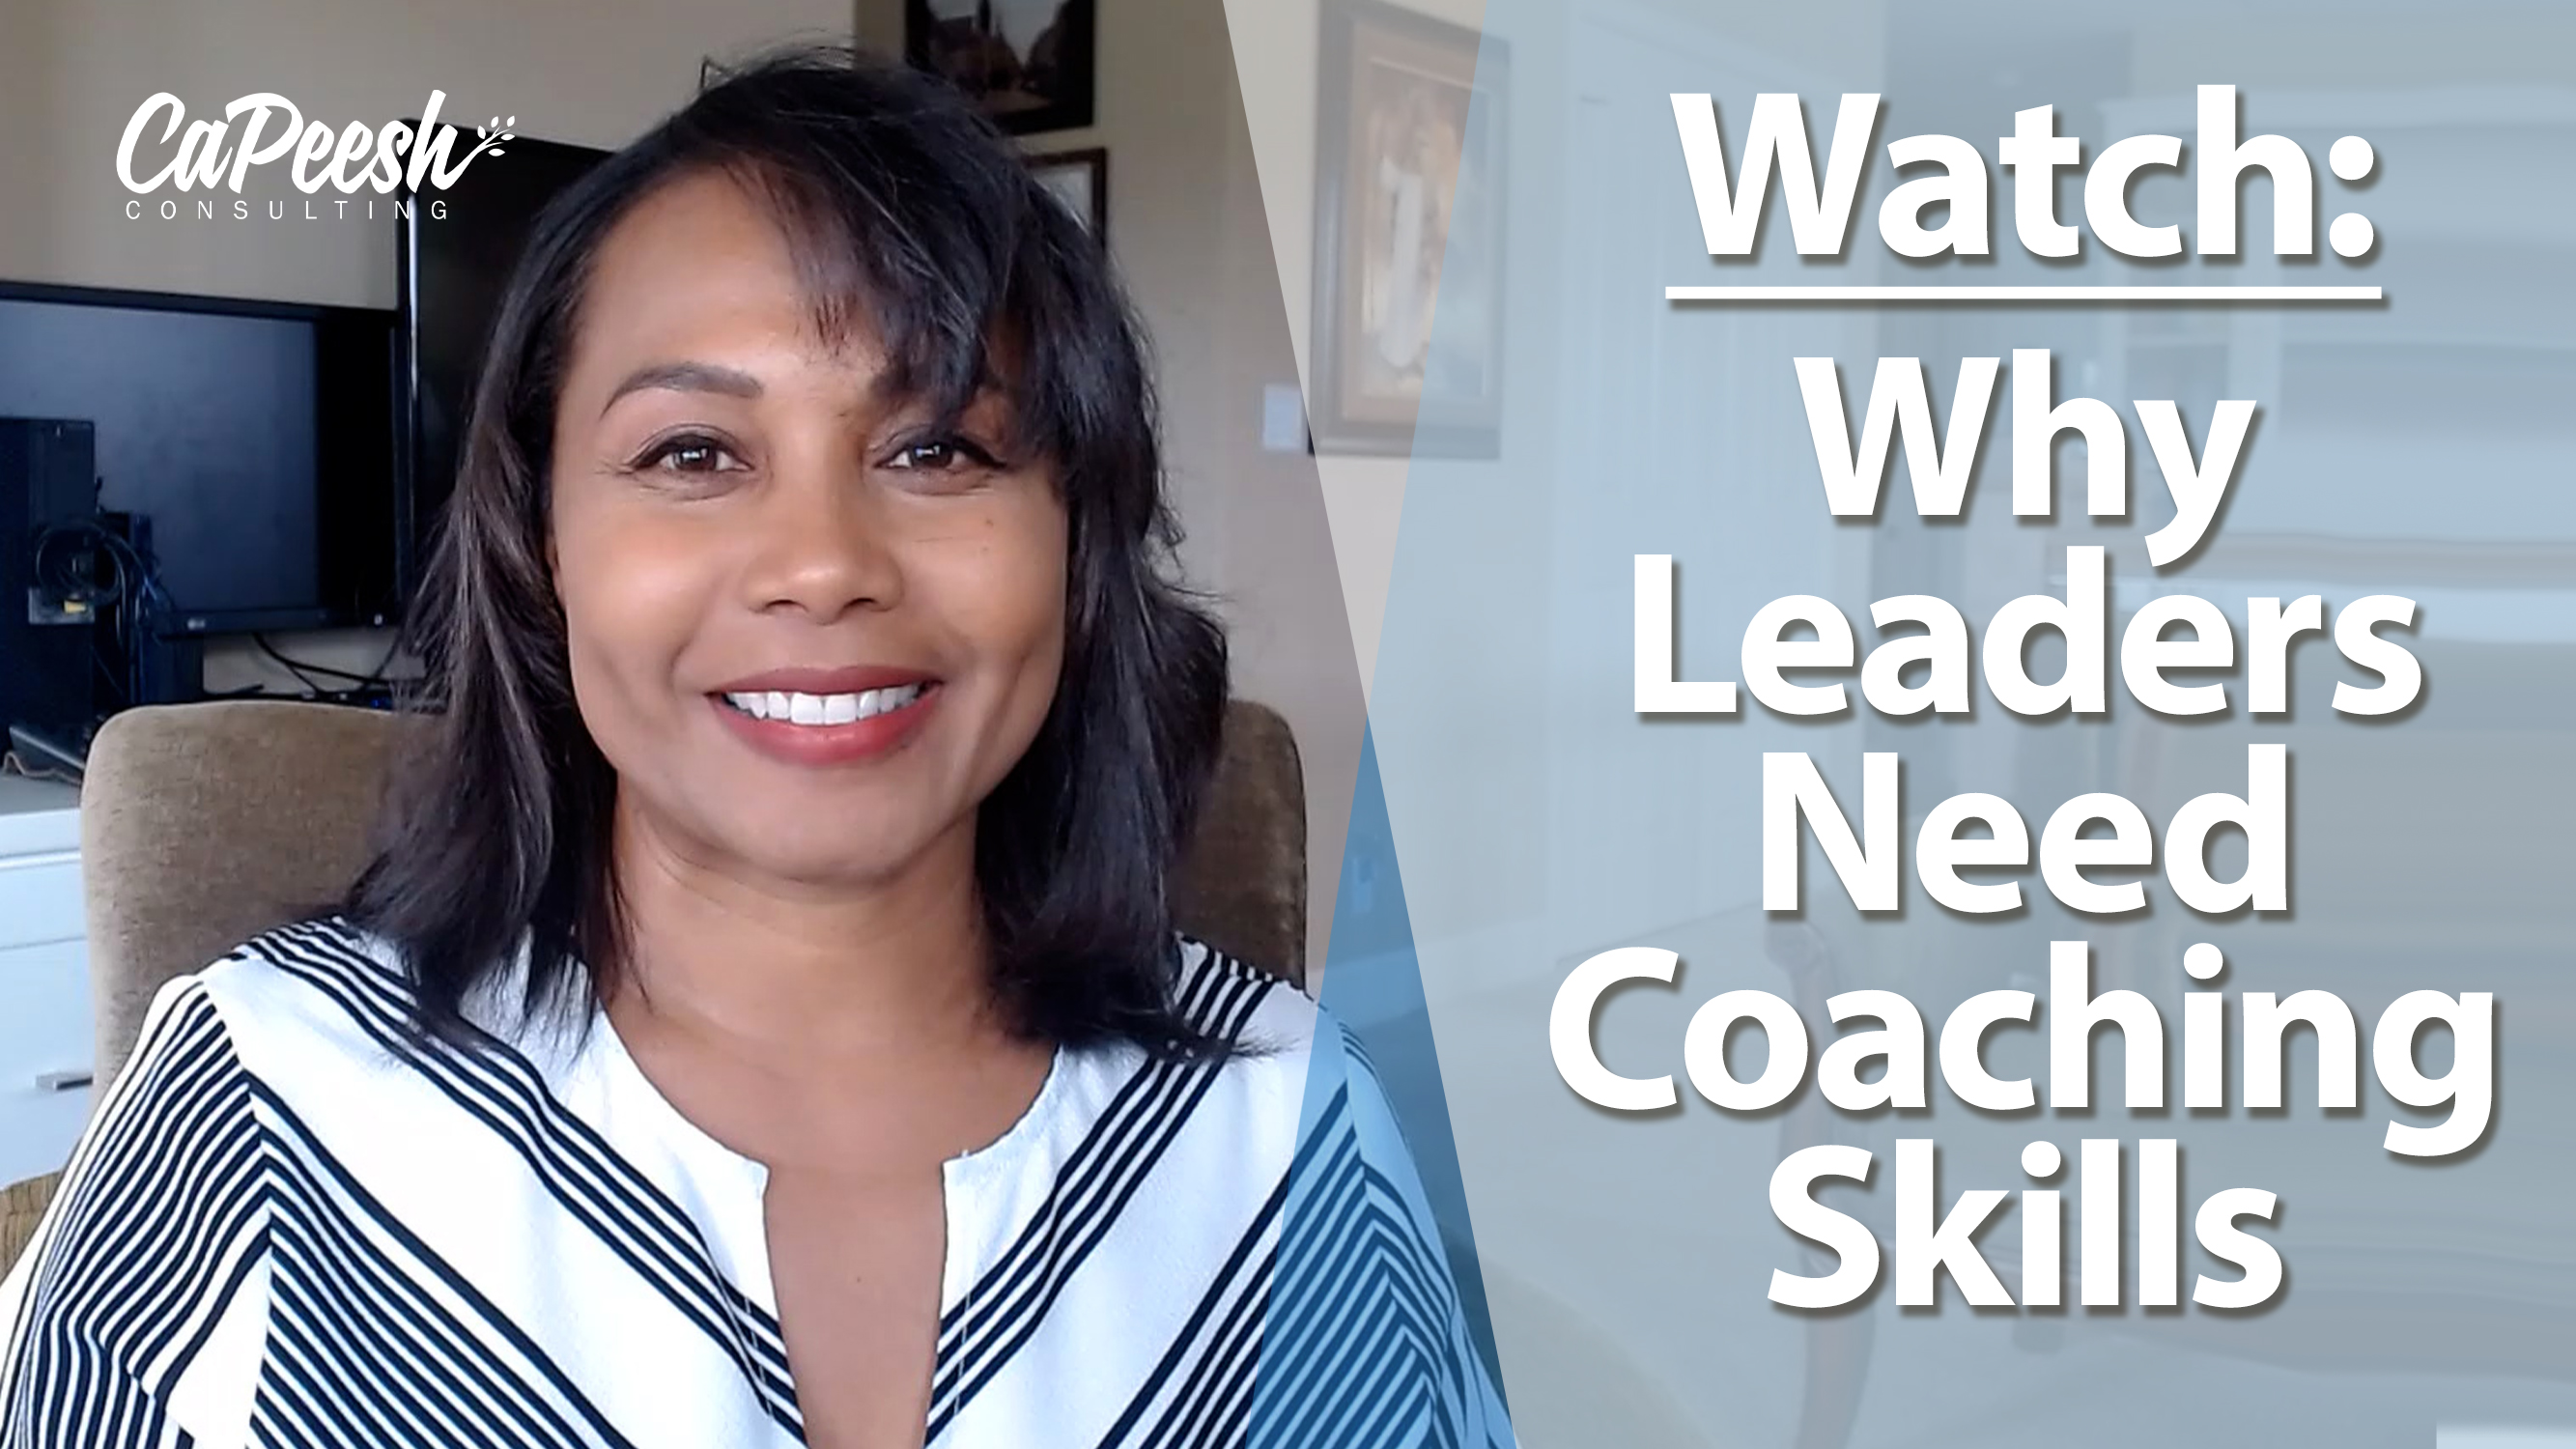 Why Leaders Need a Coach